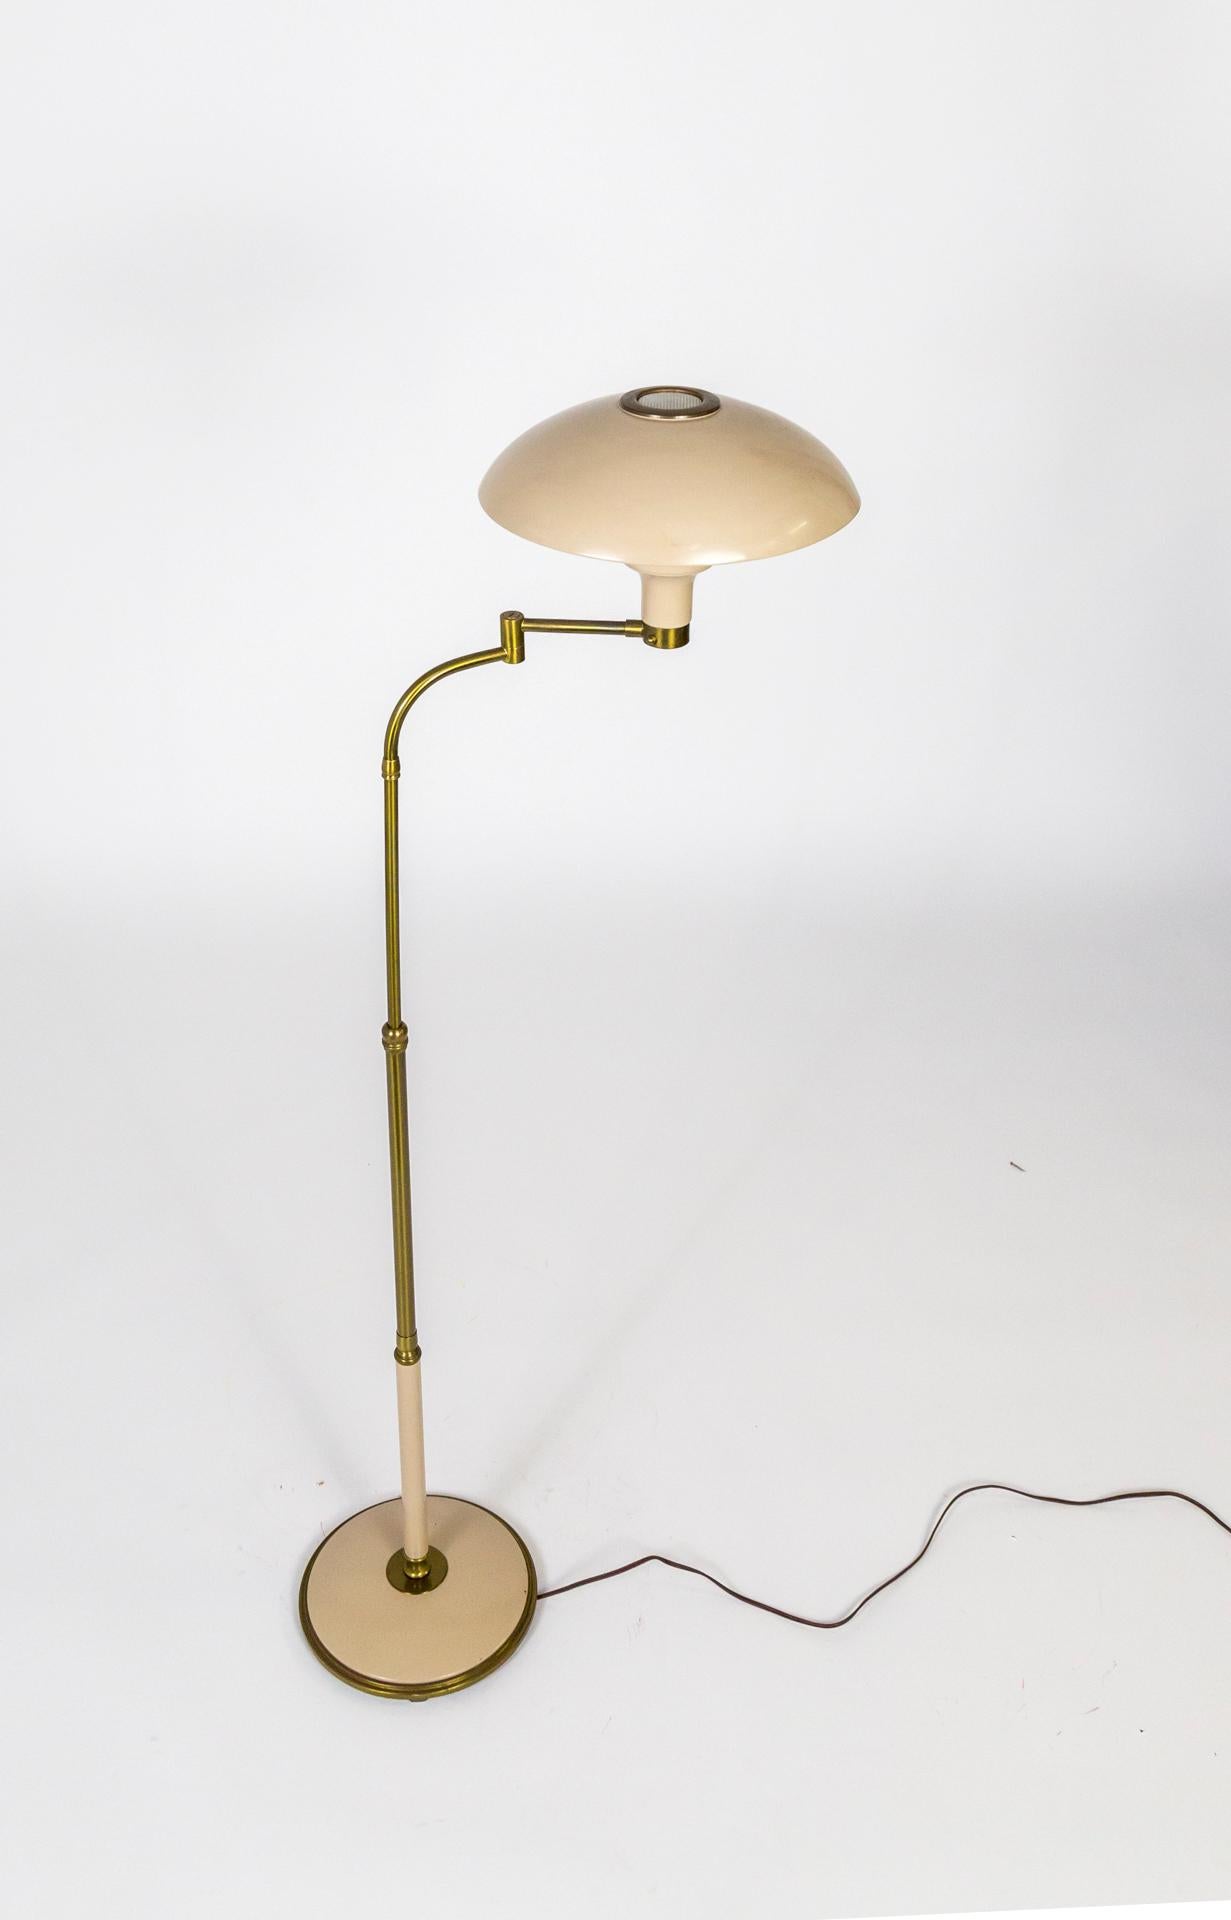 20th Century Dazor 1950s Flying Saucer Floor Lamp in Brass & Buff Lacquer